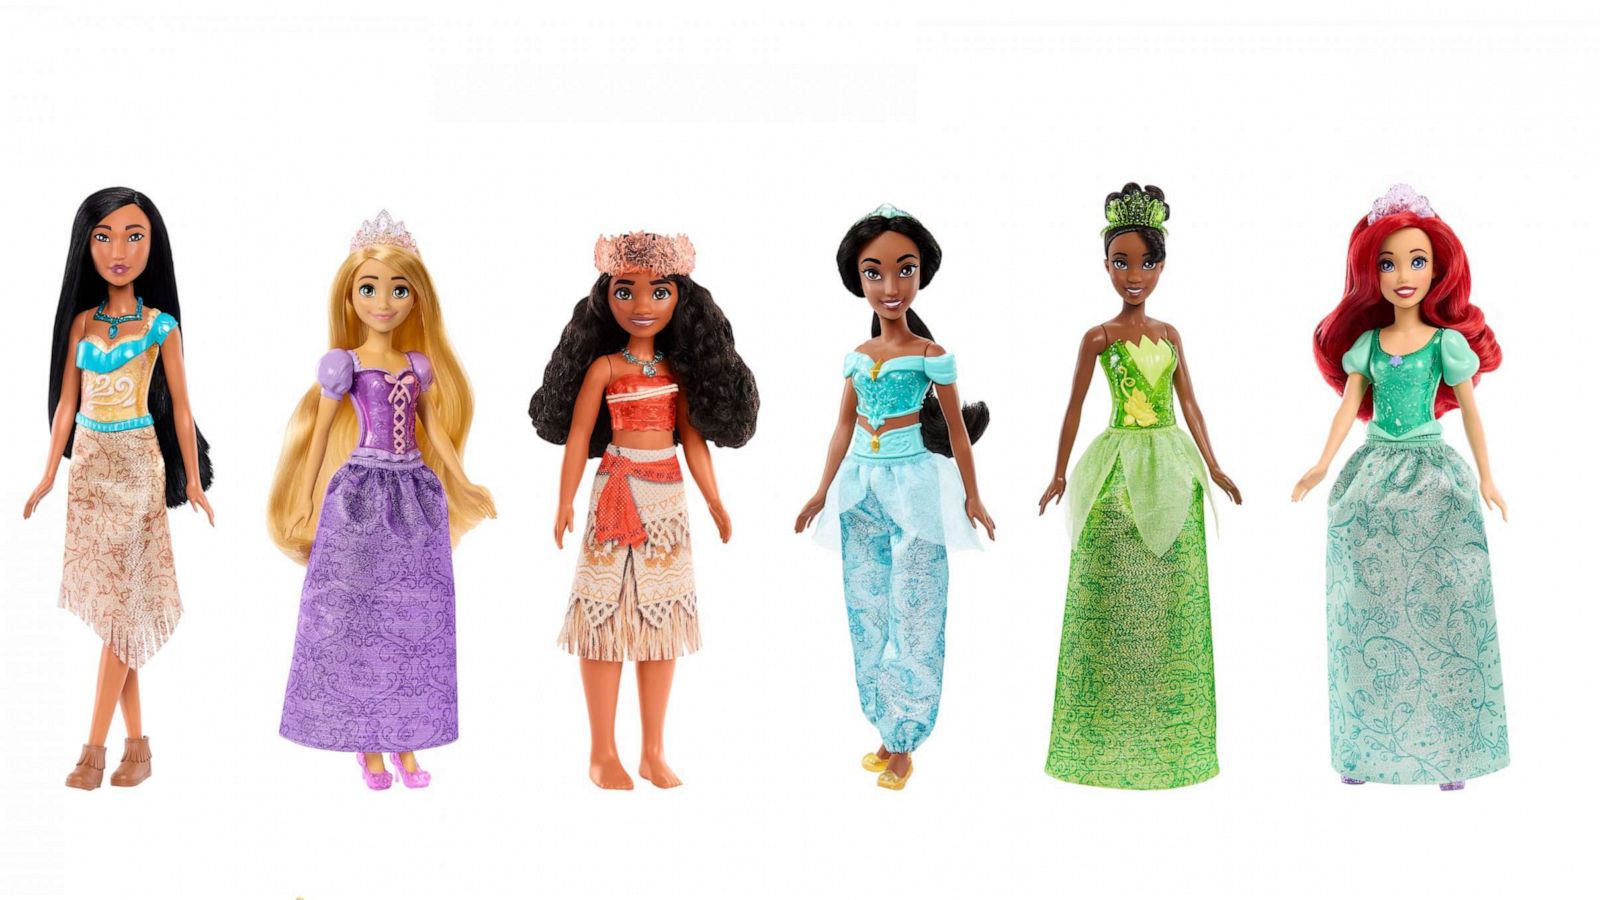 Disney and Mattel team up to launch re-imagined line of Disney Princess dolls - ABC News